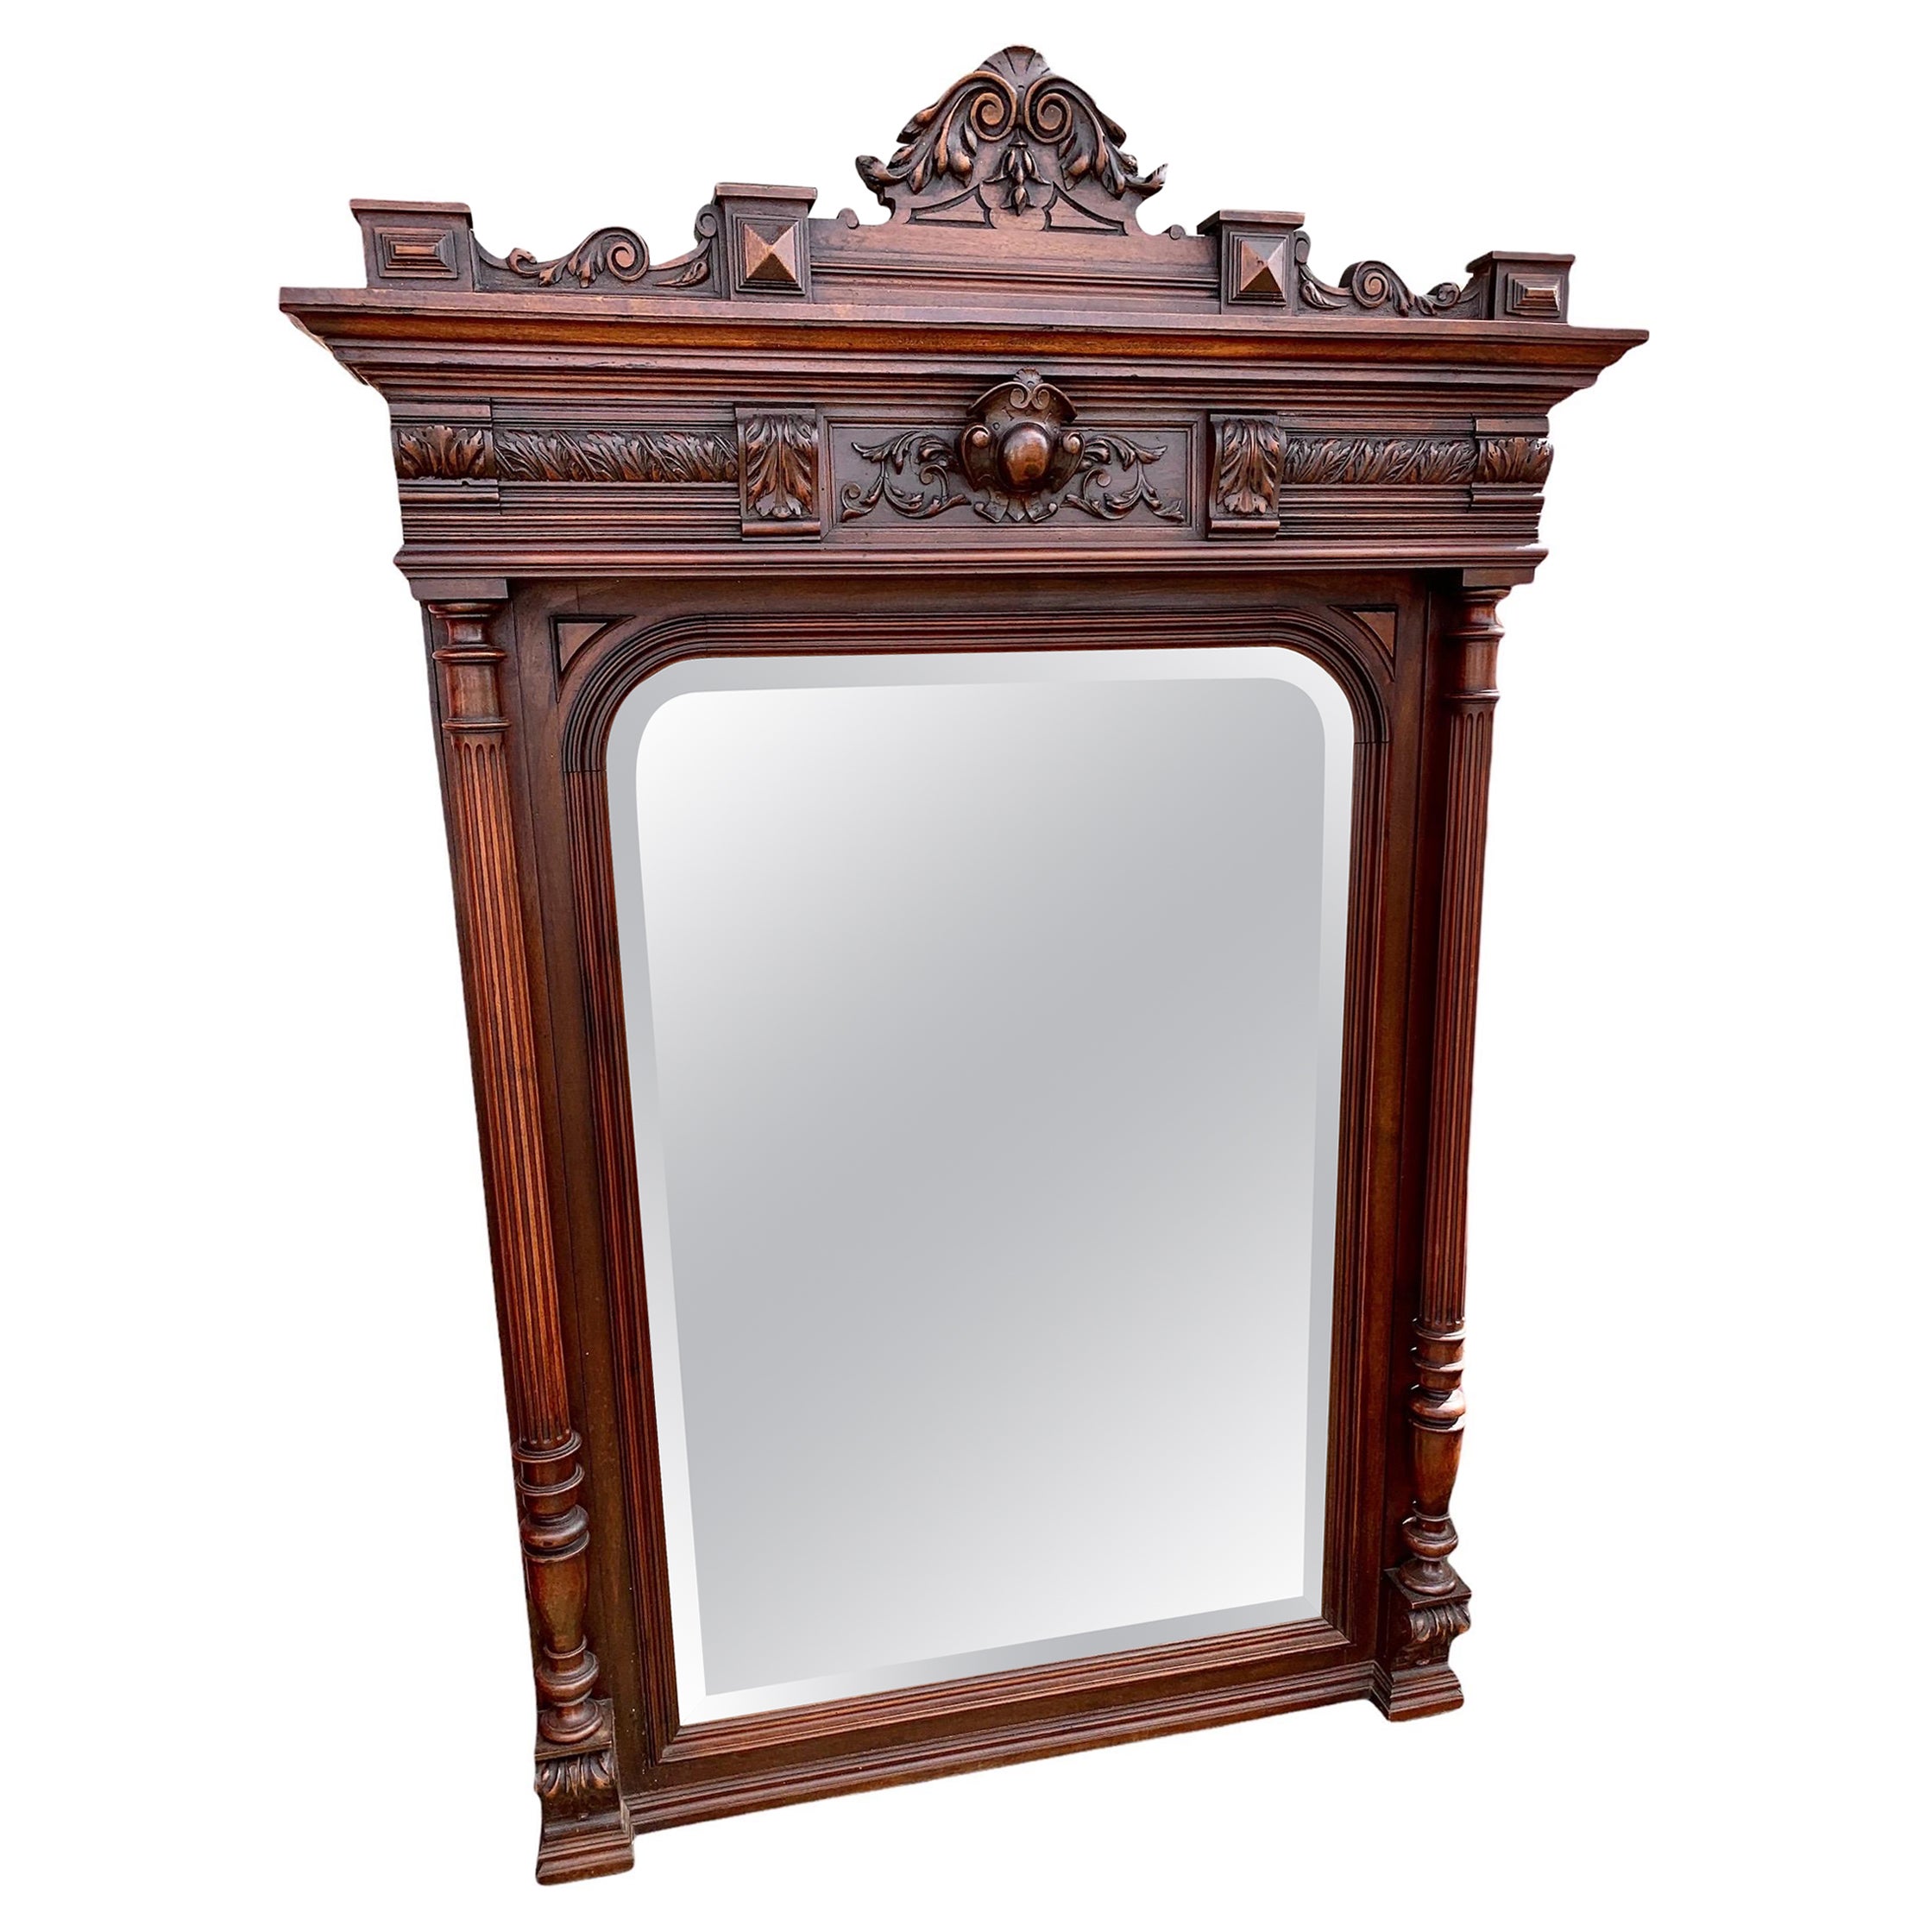 19th Century Carved Walnut French Renaissance Revival Over Mantle Mirror